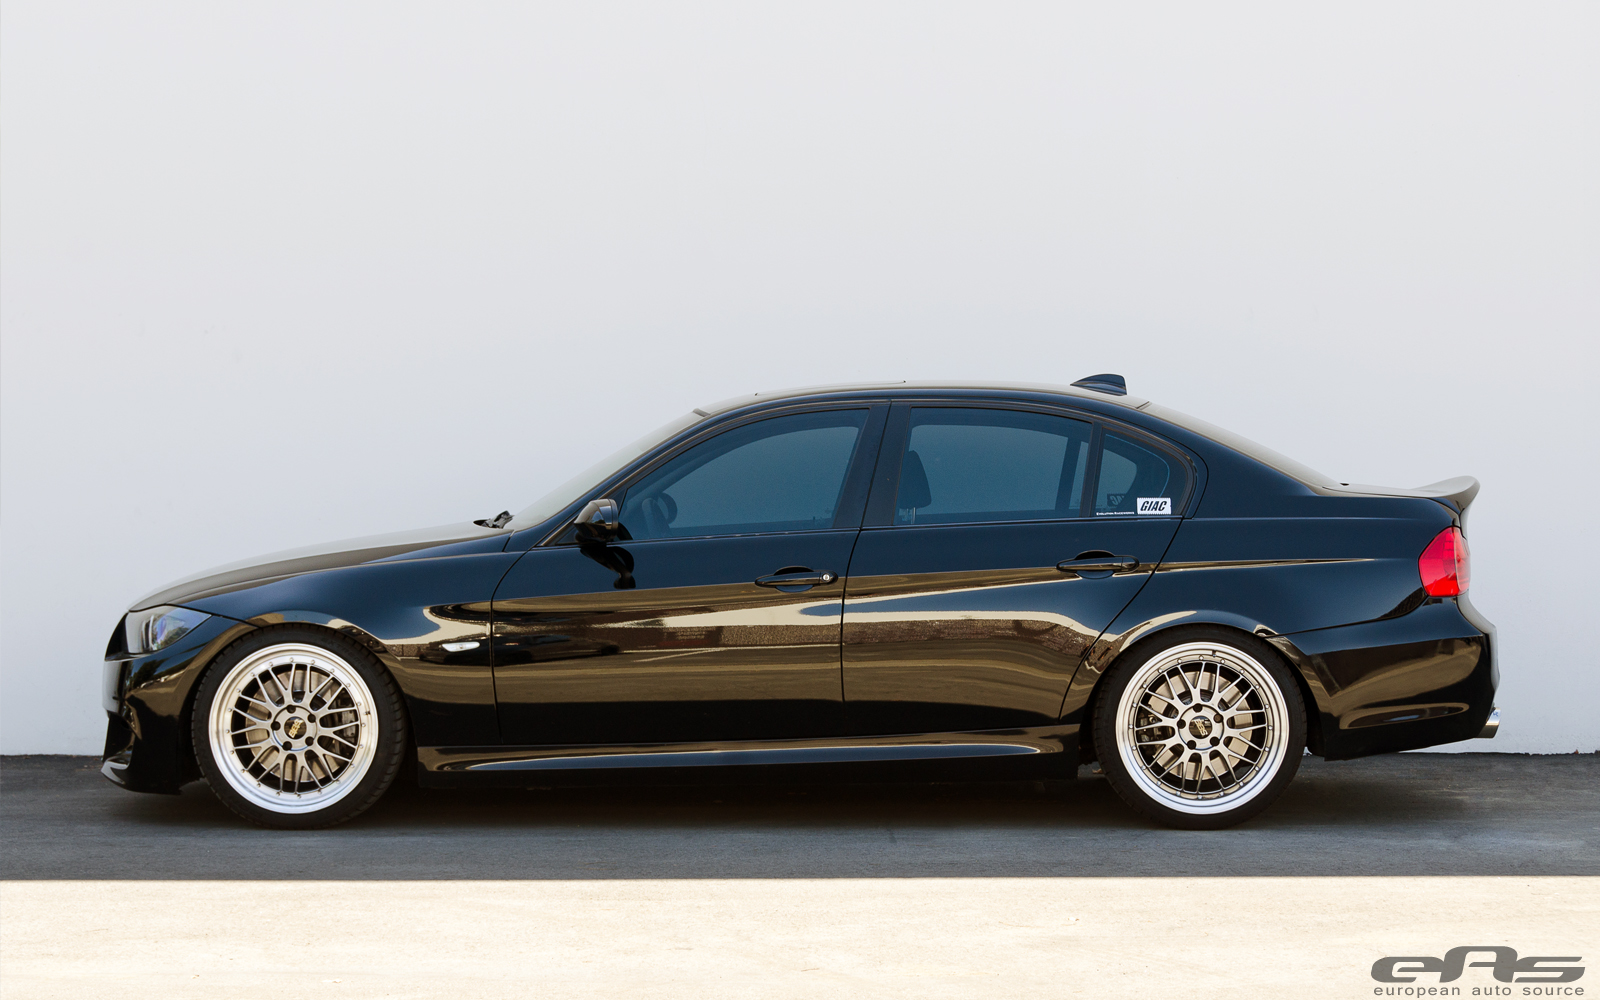 Extremely Tuned BMW E90 335i Hails from EAS autoevolution